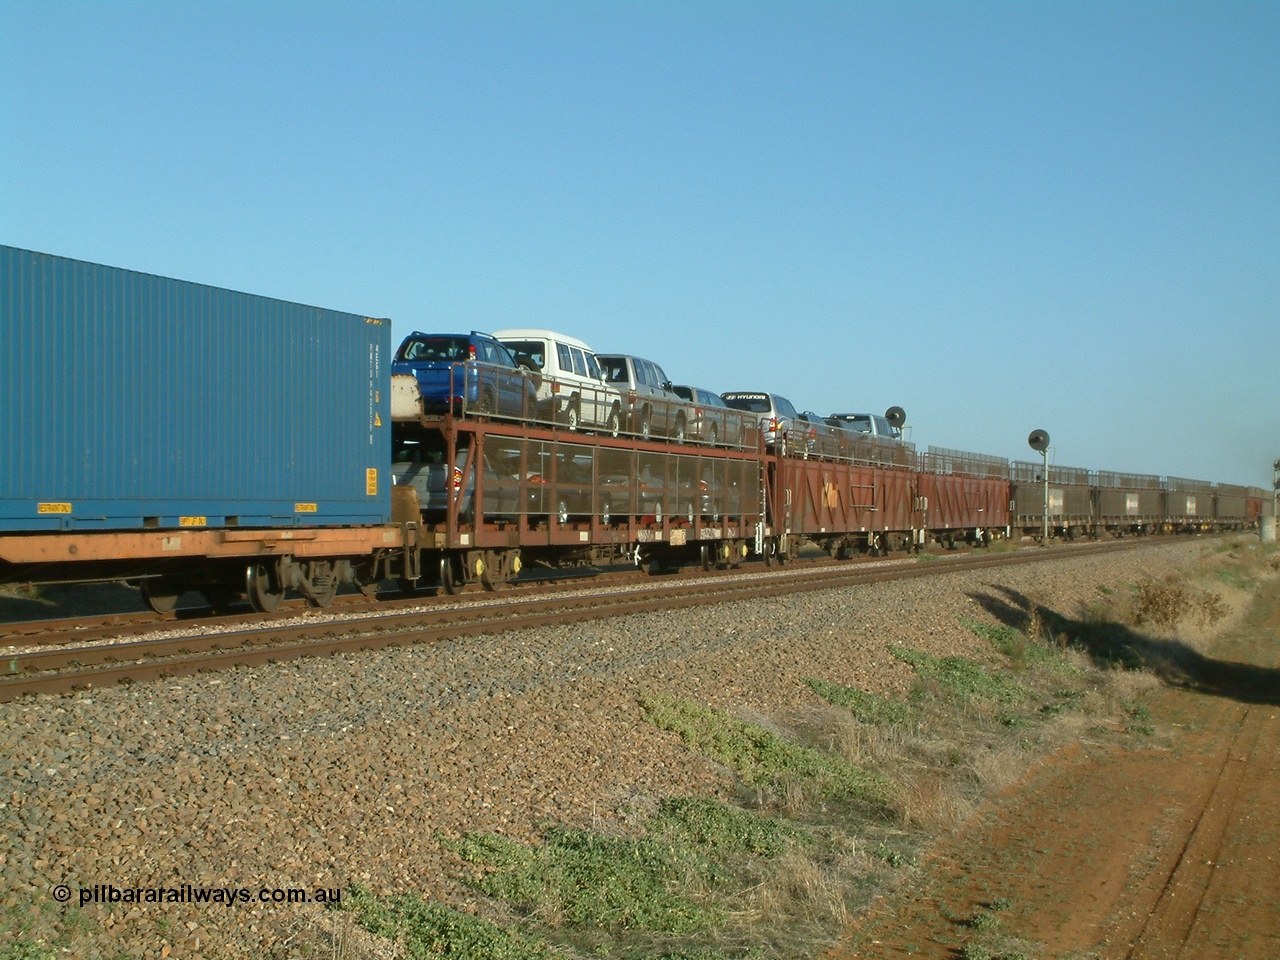 030403 165644
Red Hill, double deck car carrying waggons transition from the loop back onto the mainline. 3rd April 2003.
